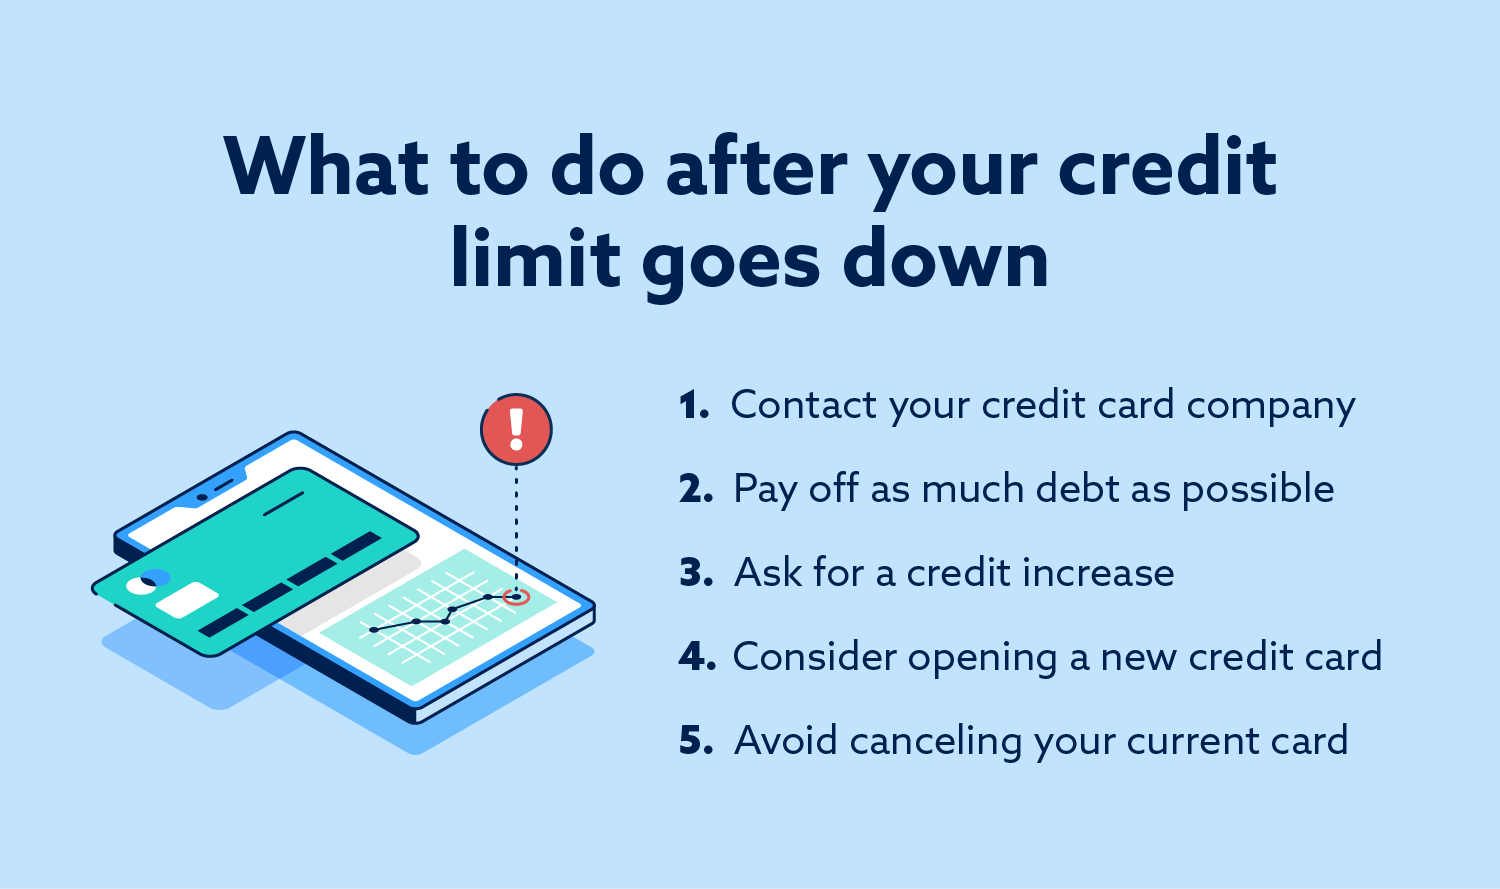 4 Tips to Protect Your Credit While You Can